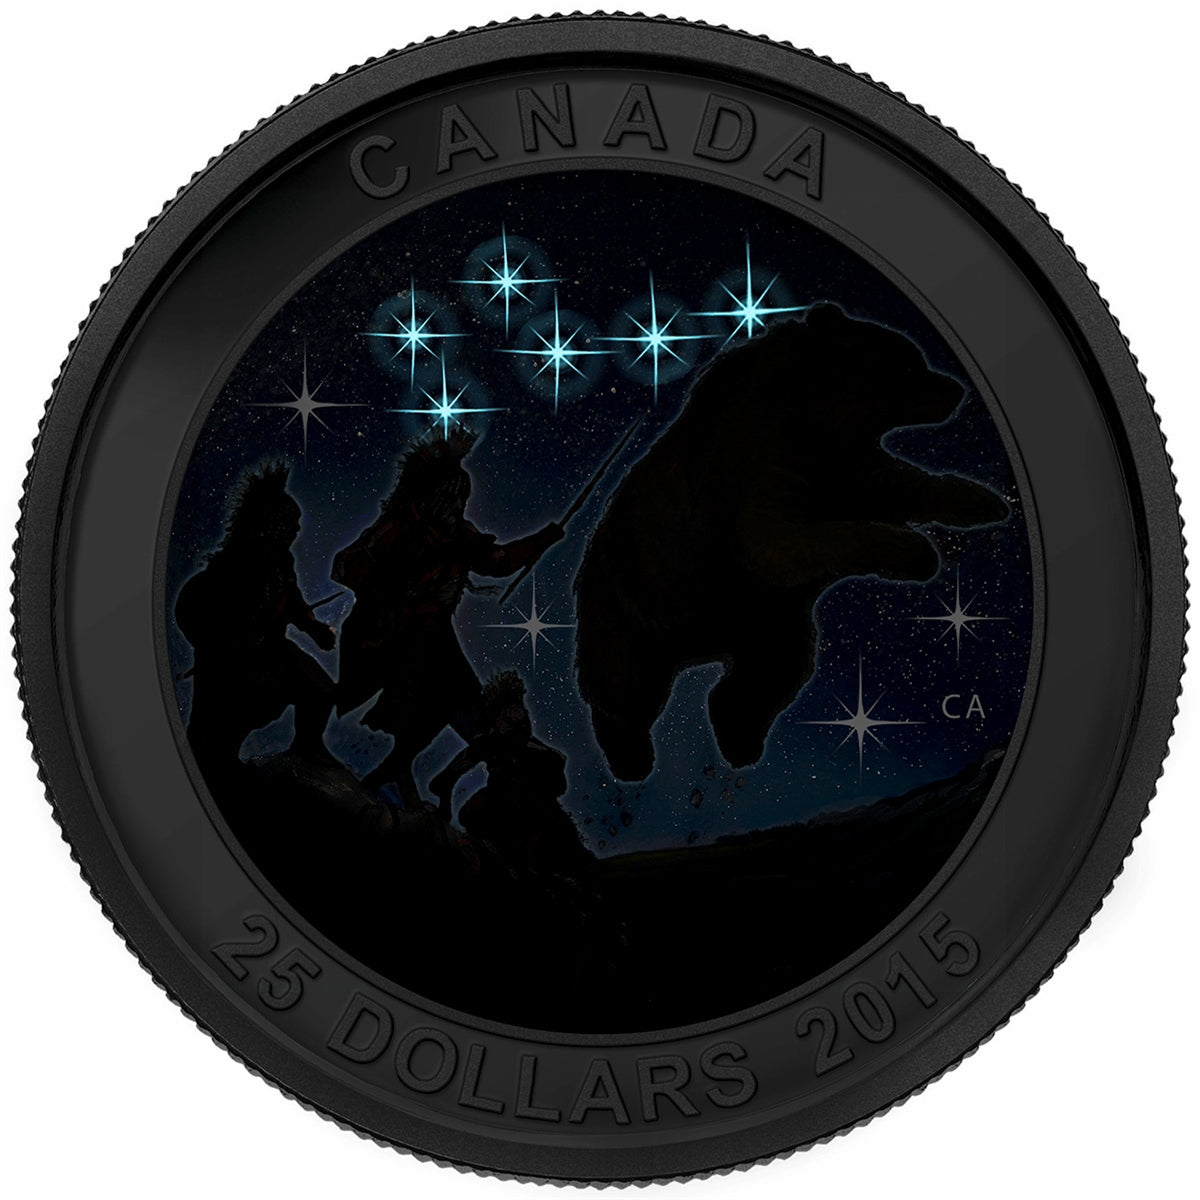 Fine Silver Glow-in-the-Dark Coin – Star Charts: The Great Ascent - Mintage: 7,500 (2015)